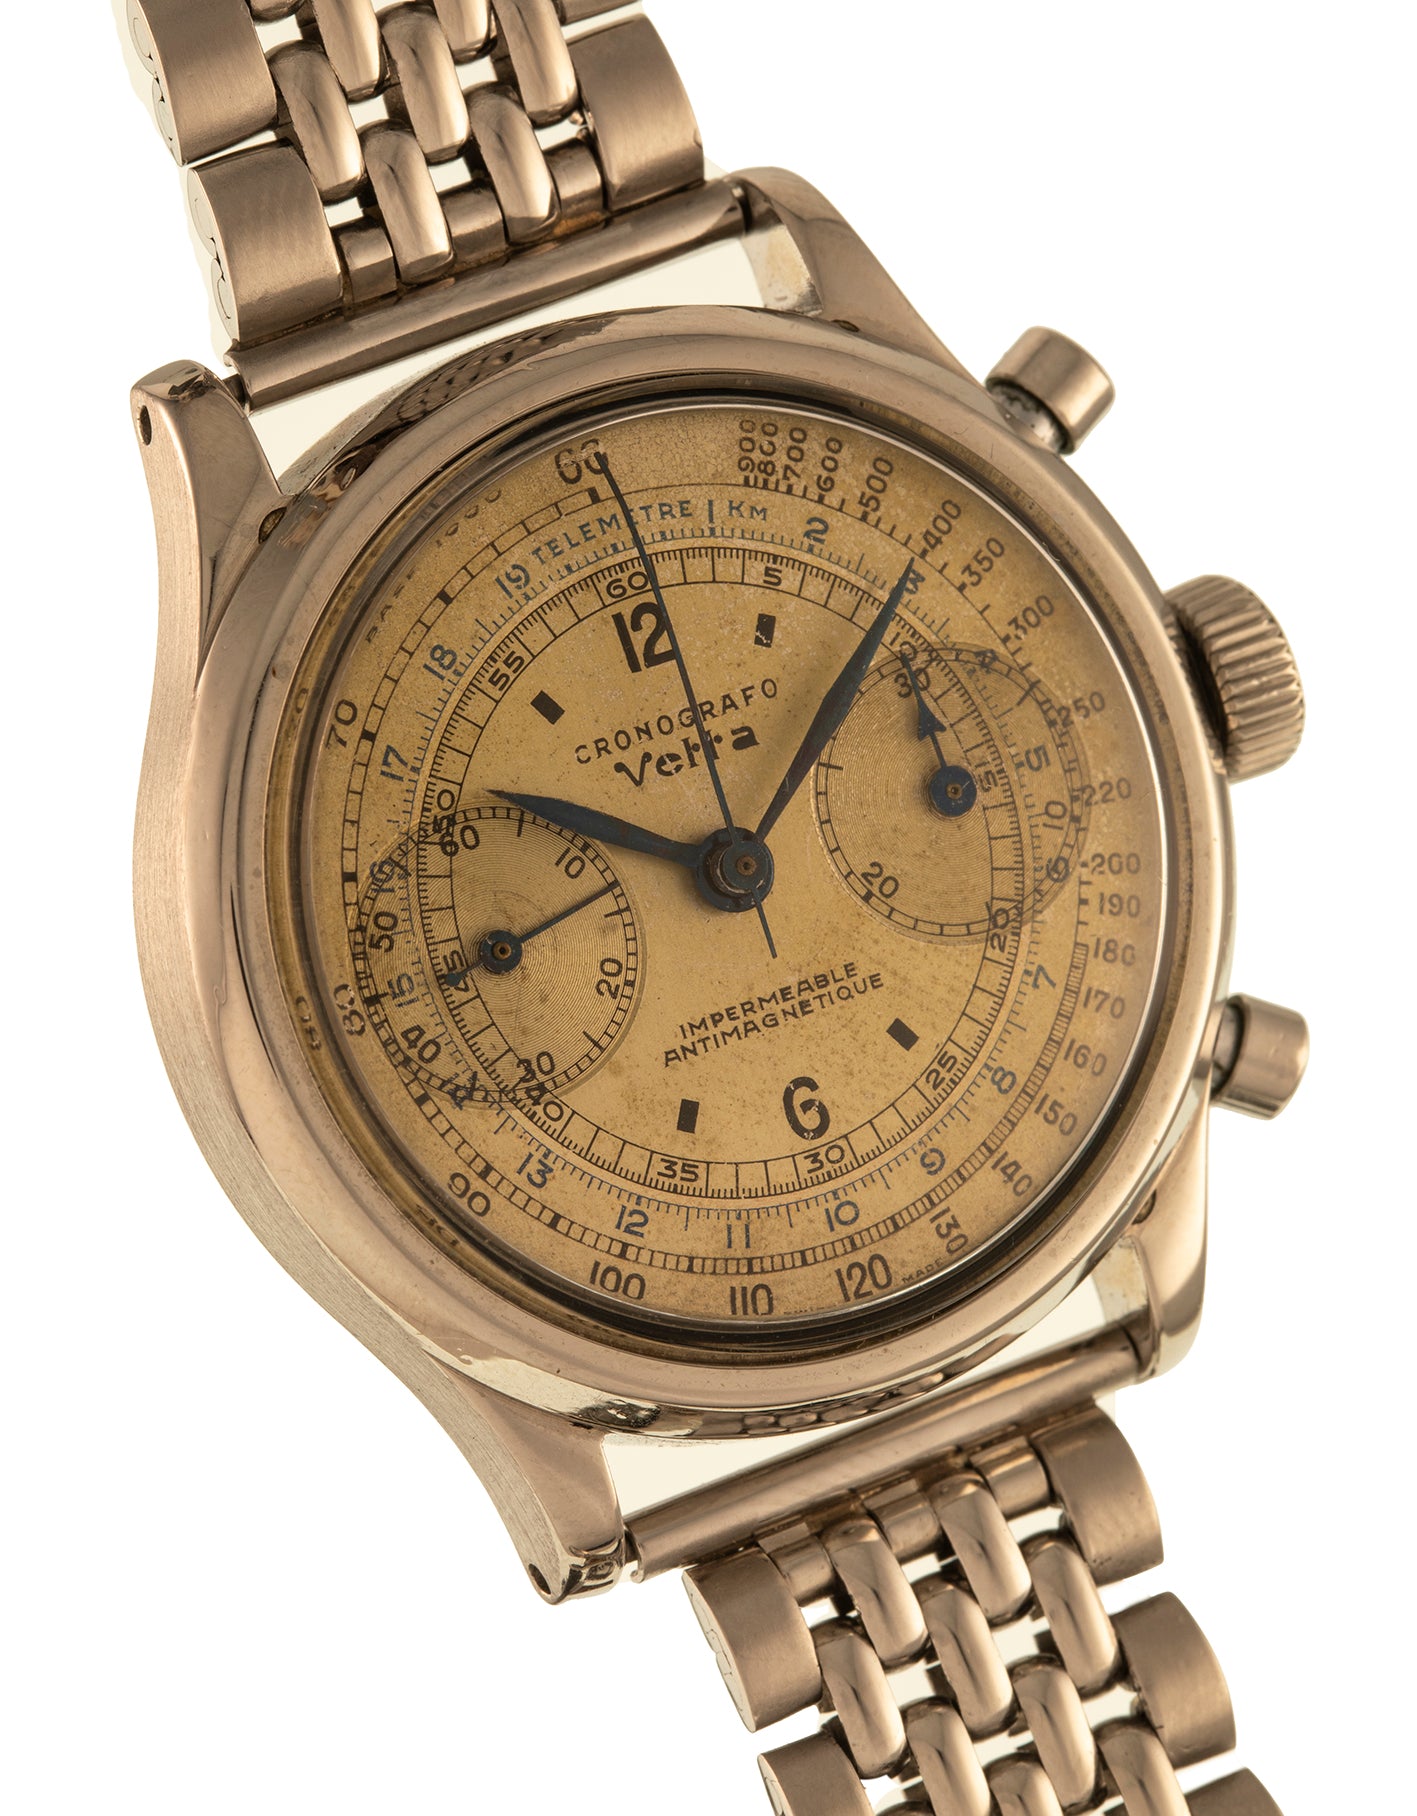 Vetta "Impermeable" Antimagnetique Chronograph stainless steel  with bracelet 